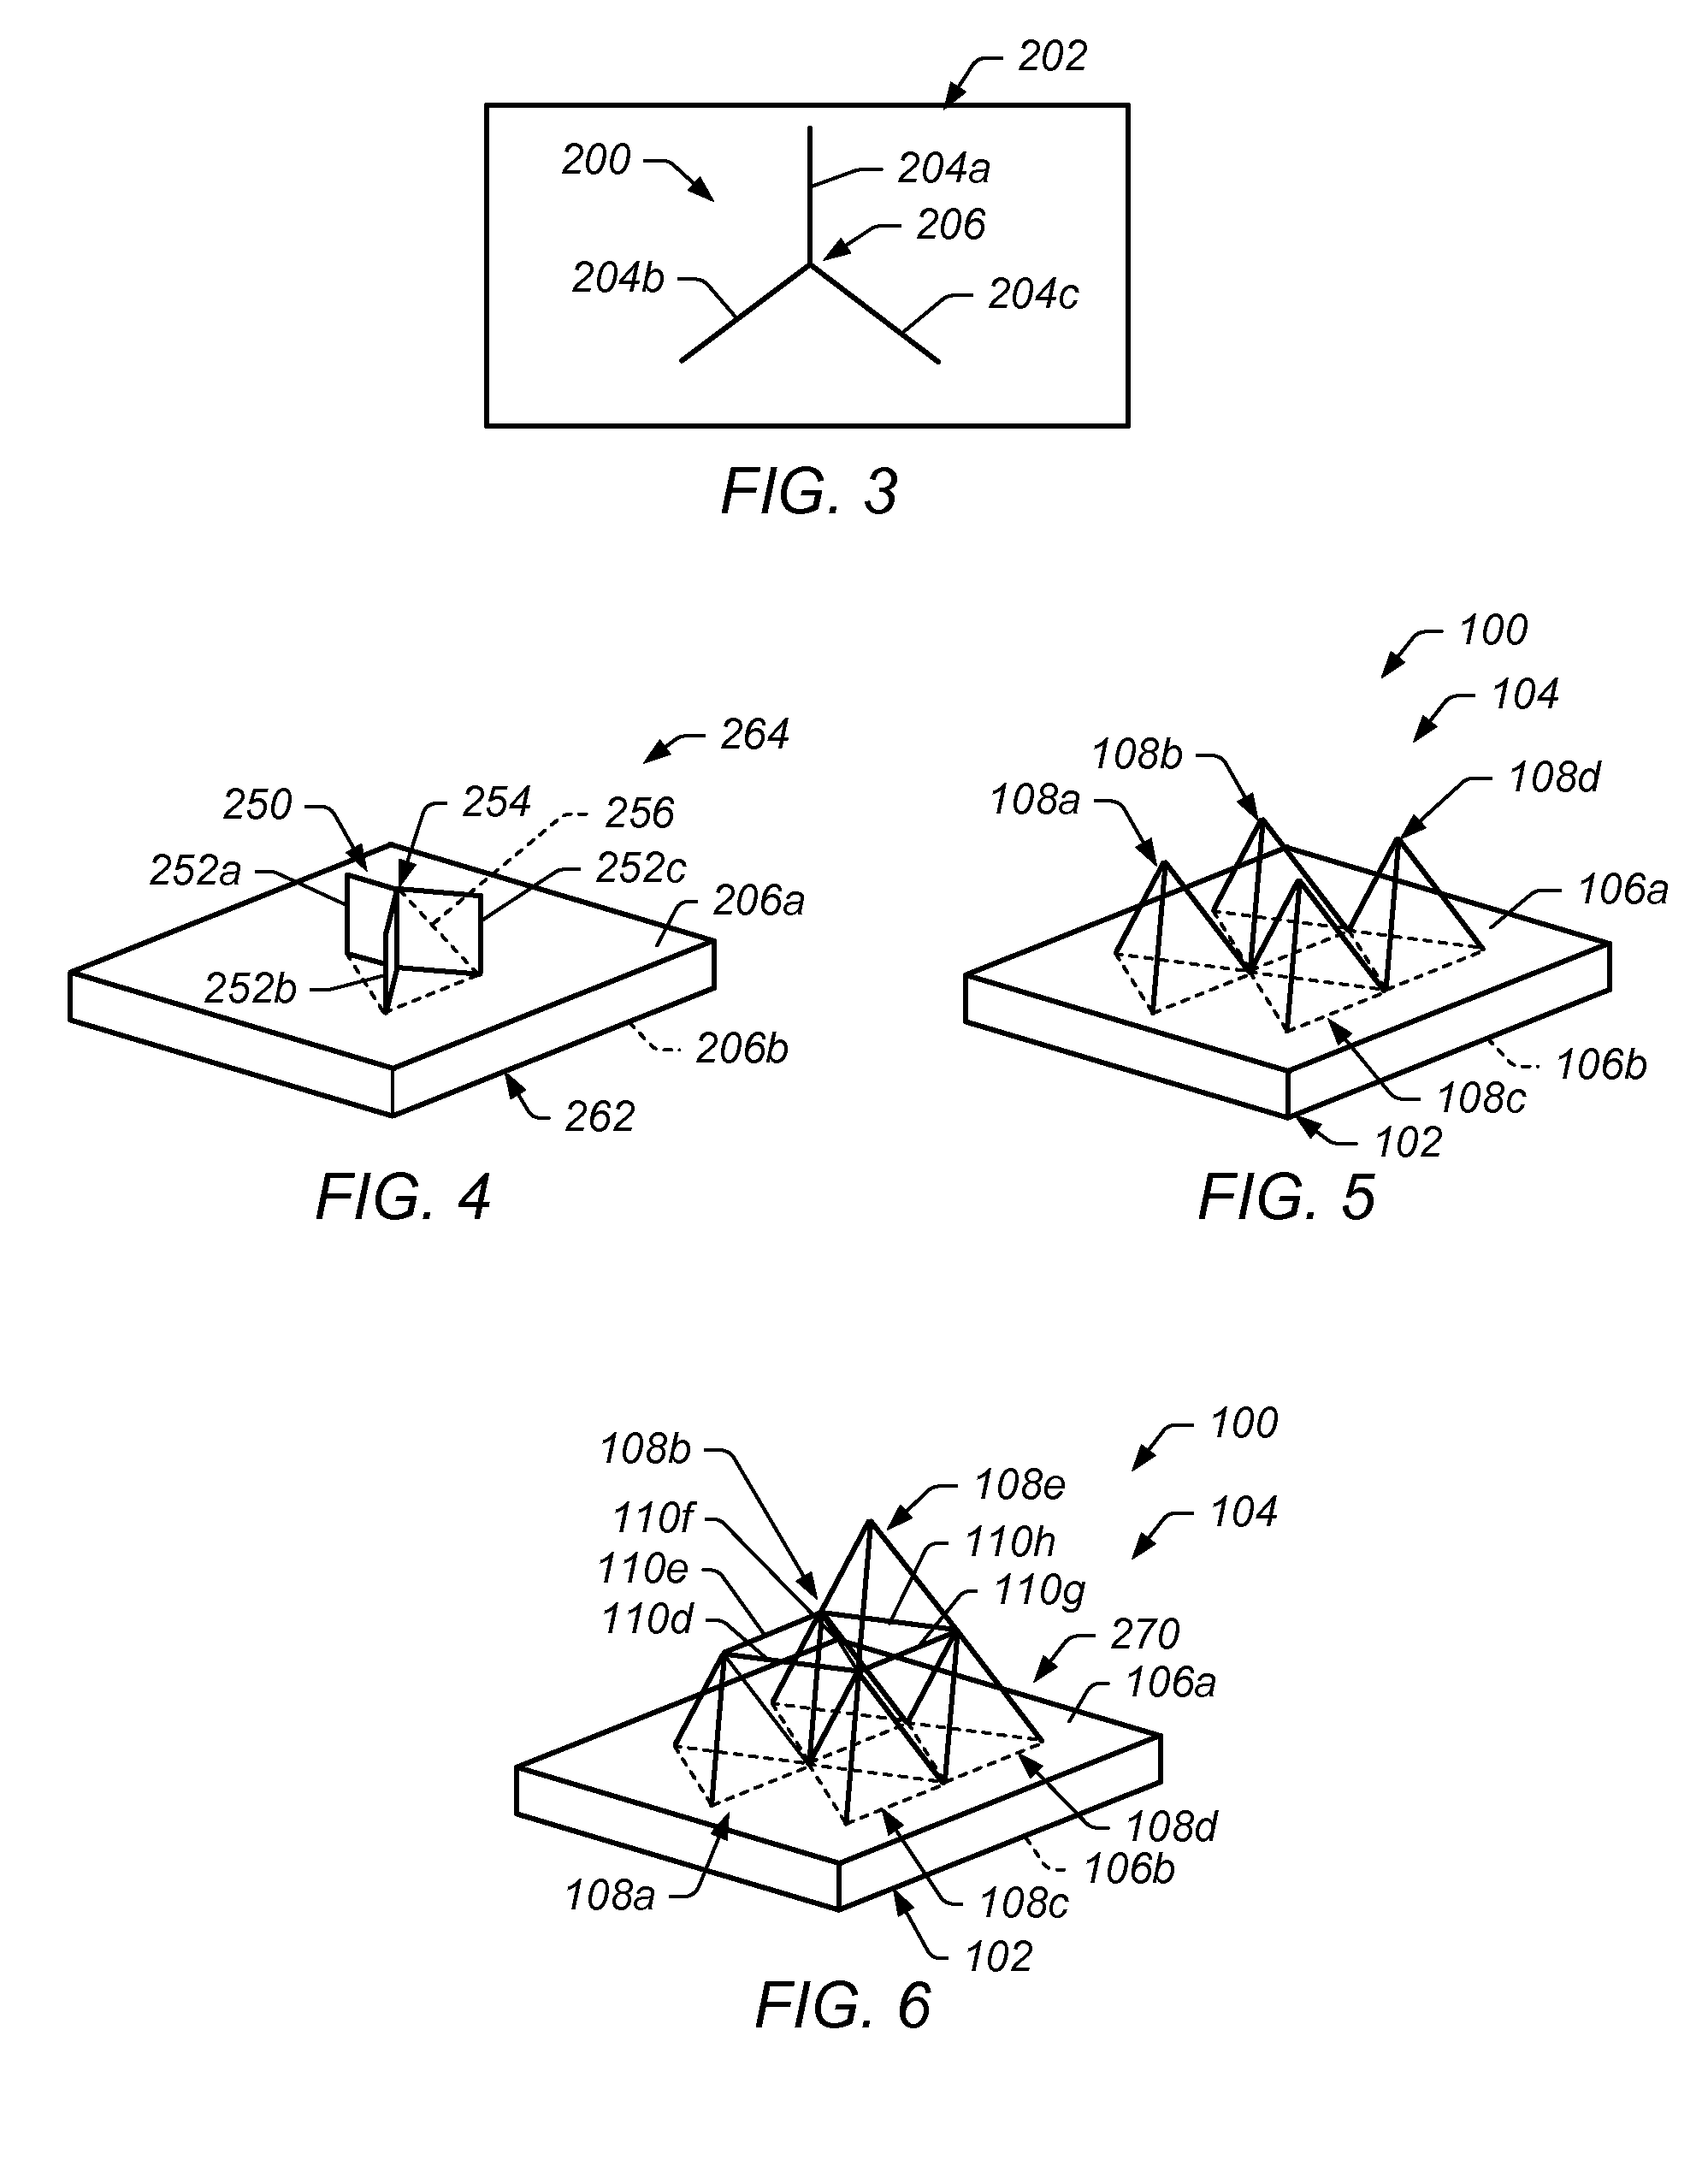 Bone implant interface system and method